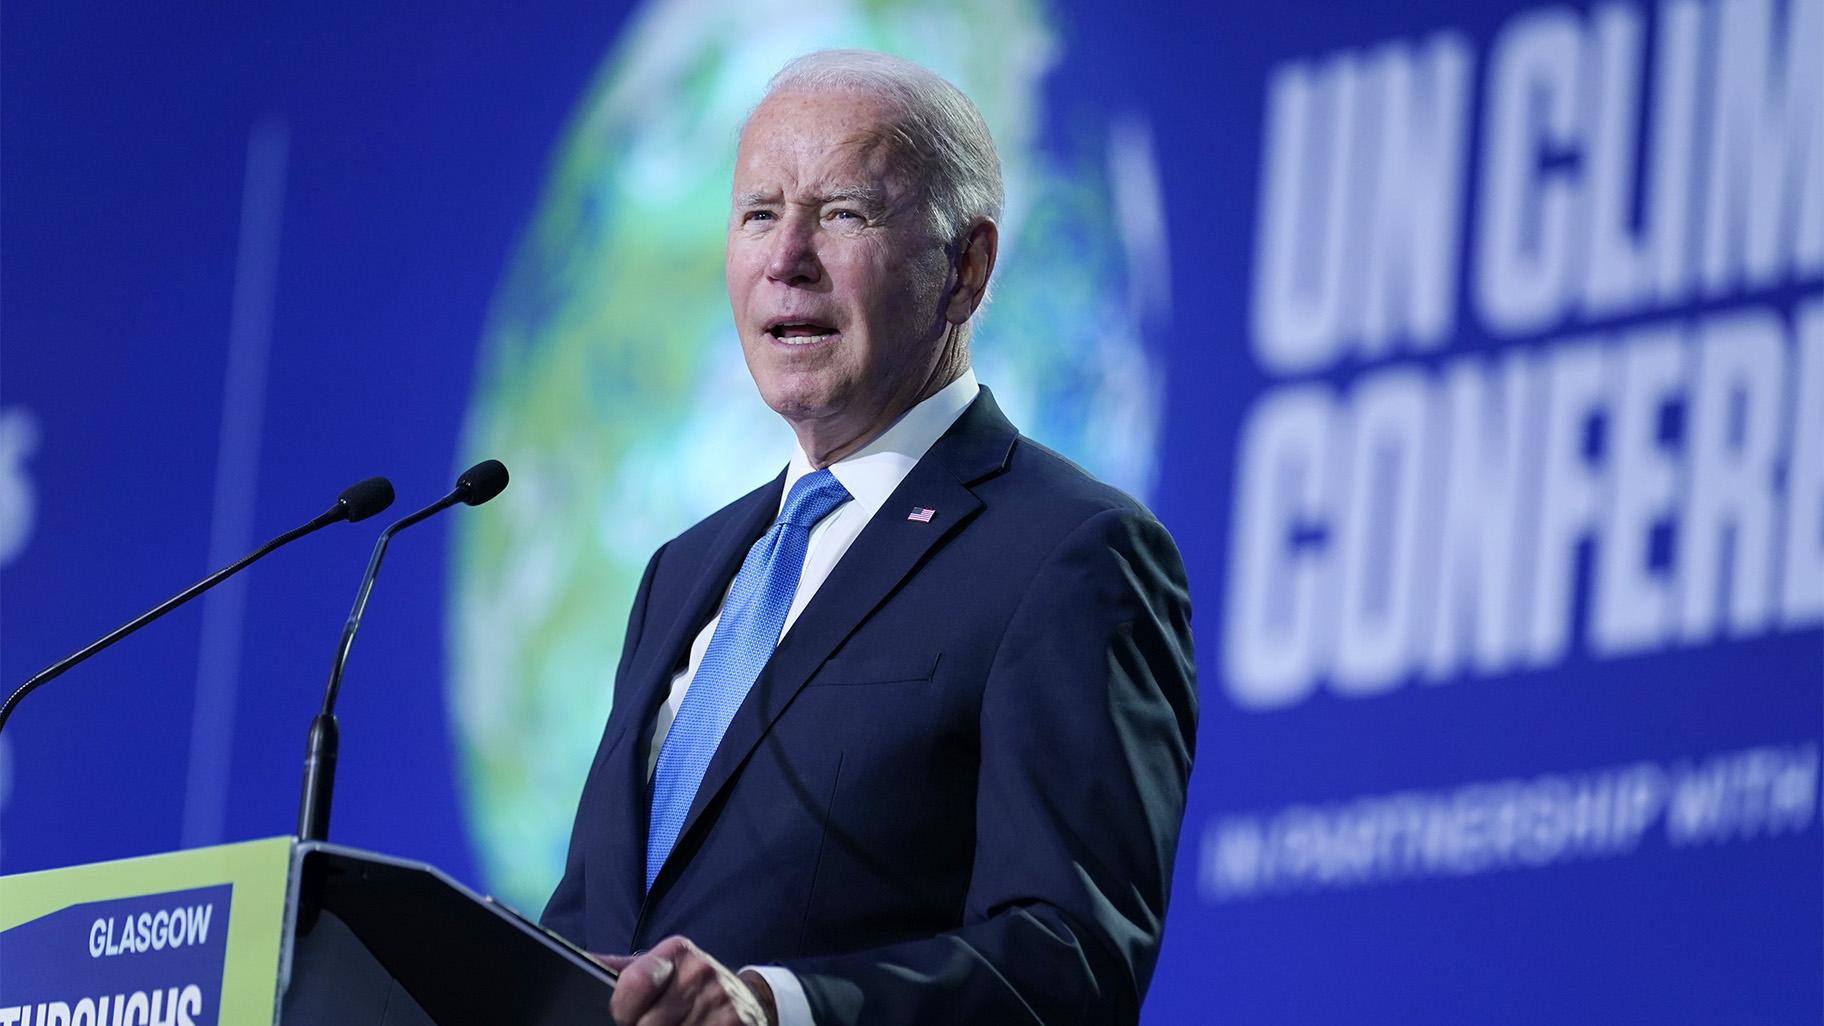 President Joe Biden speaks during the "Accelerating Clean Technology Innovation and Deployment" event at the COP26 U.N. Climate Summit, Nov. 2, 2021, in Glasgow, Scotland. 